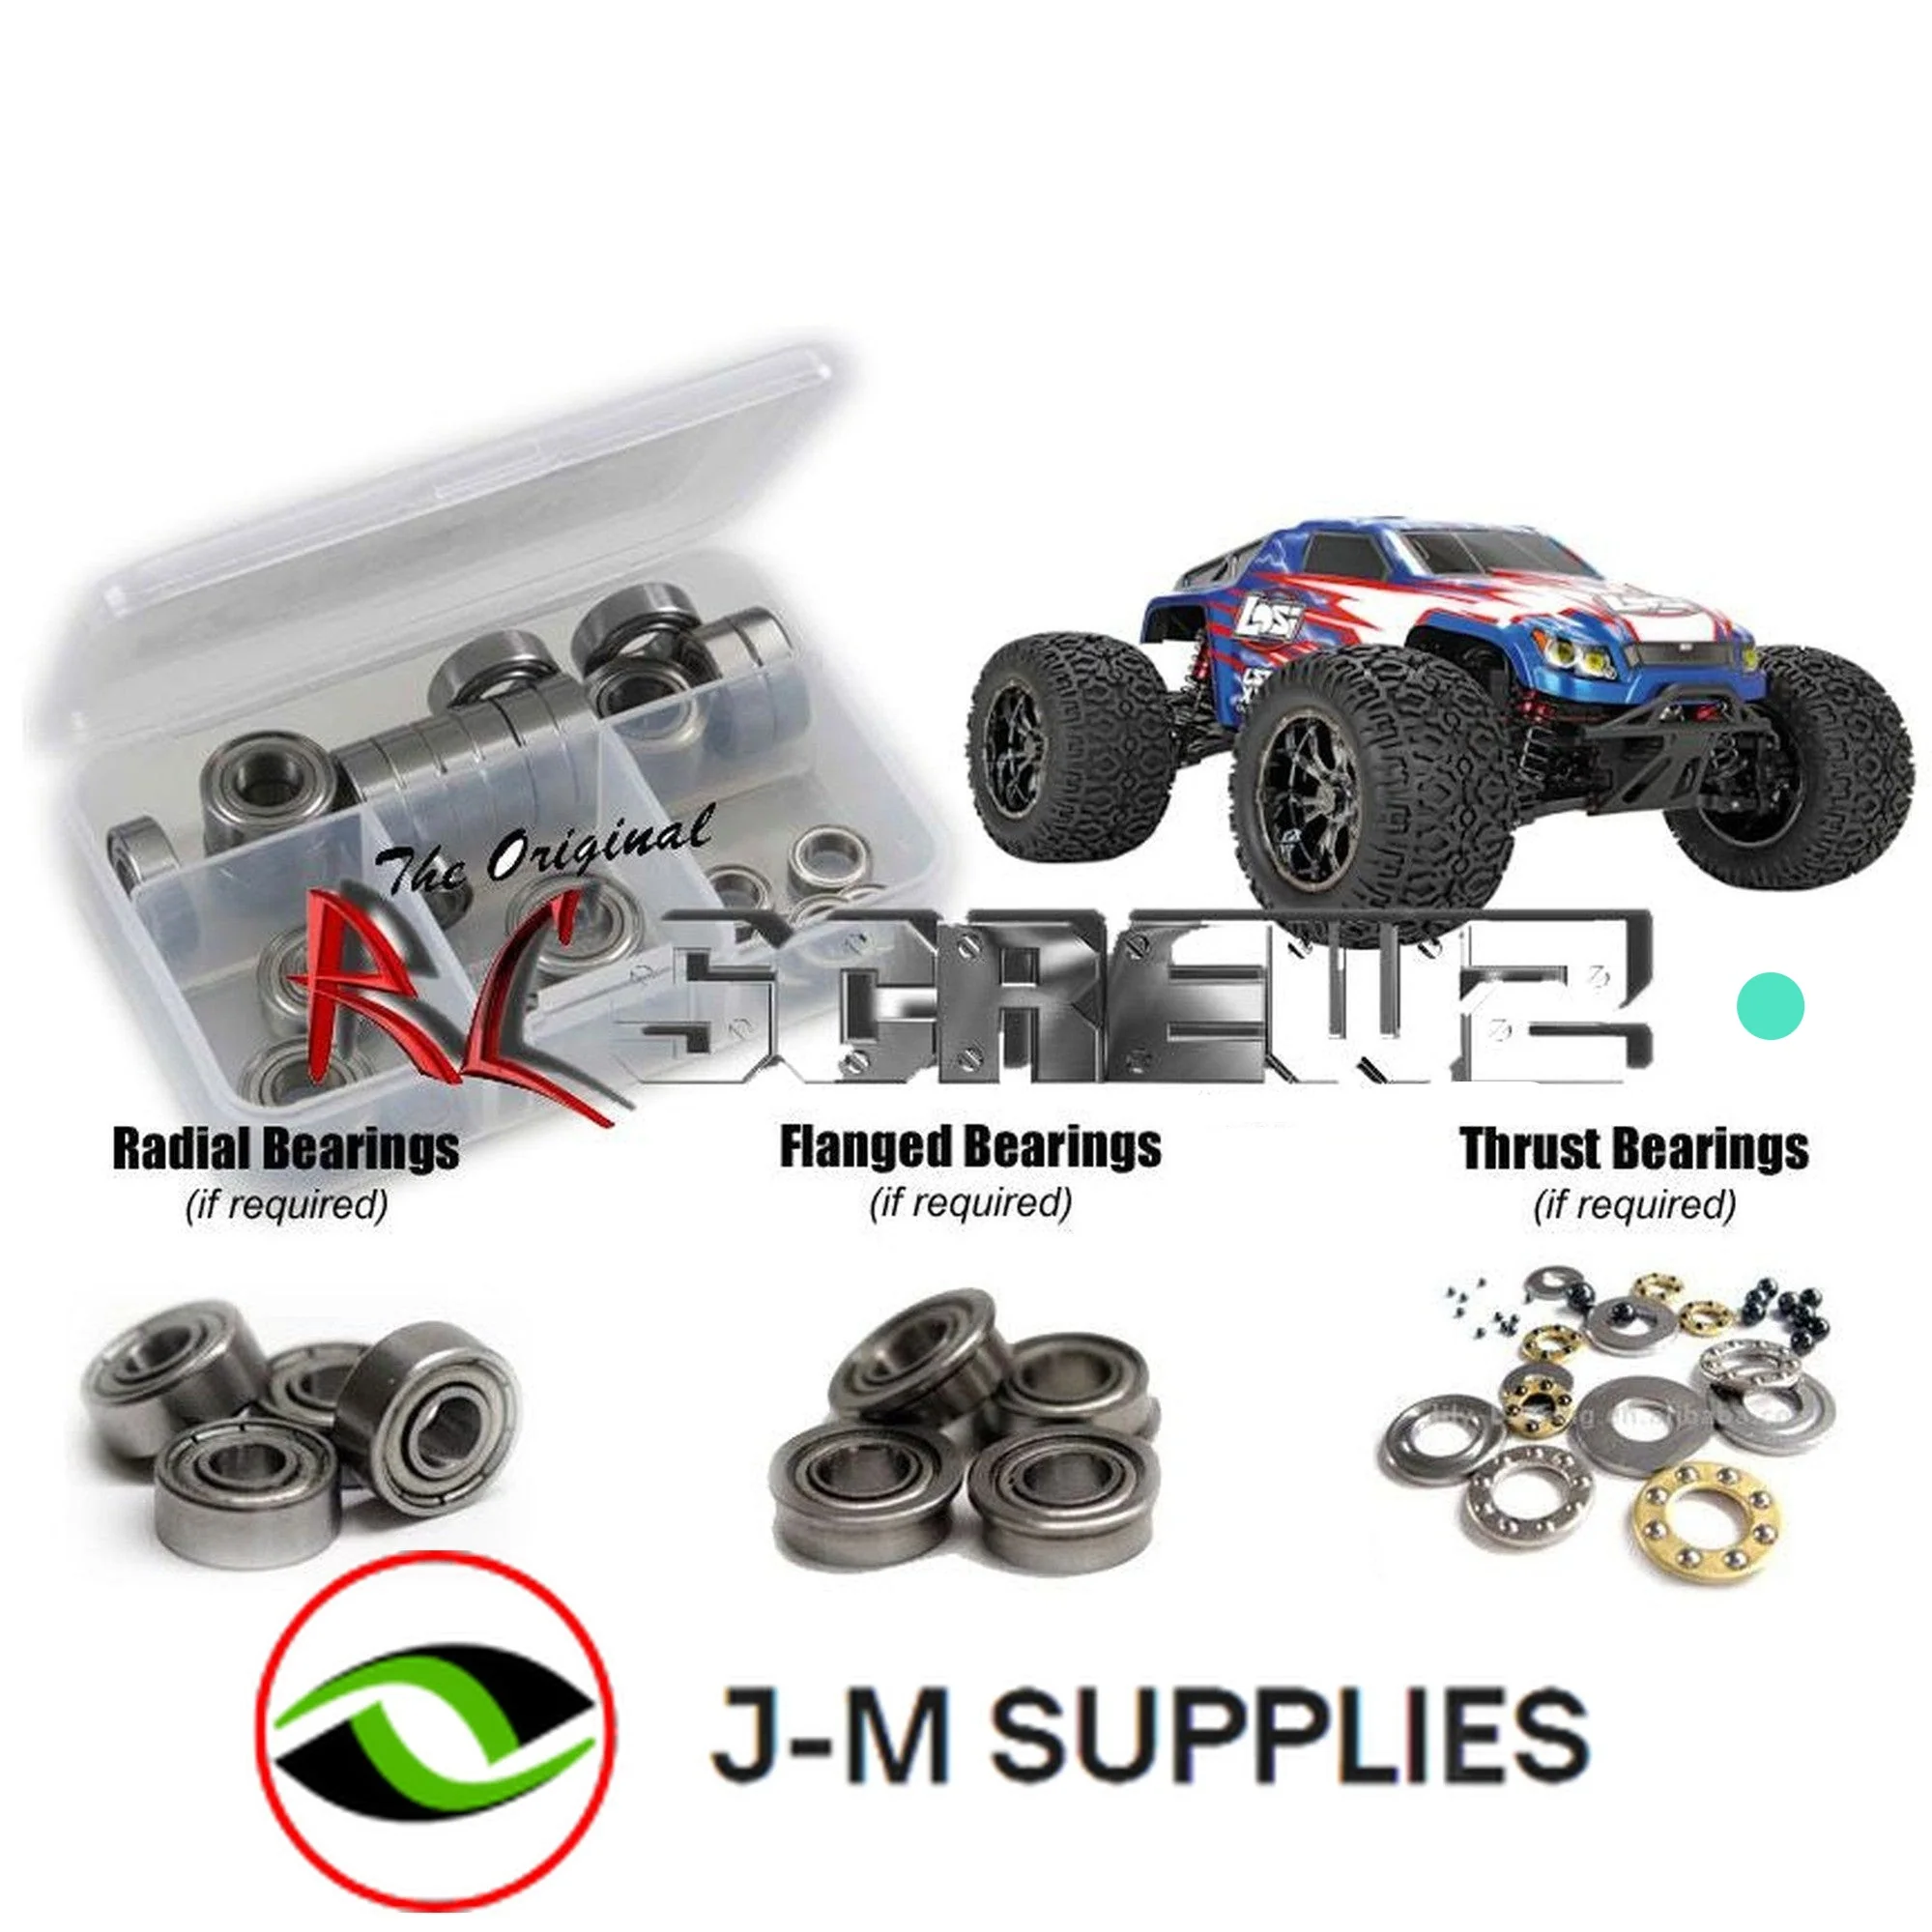 RCScrewZ Metal Shielded Bearing Kit los083b for Team Losi LST XXL-2e #TLR04004 - Picture 1 of 12